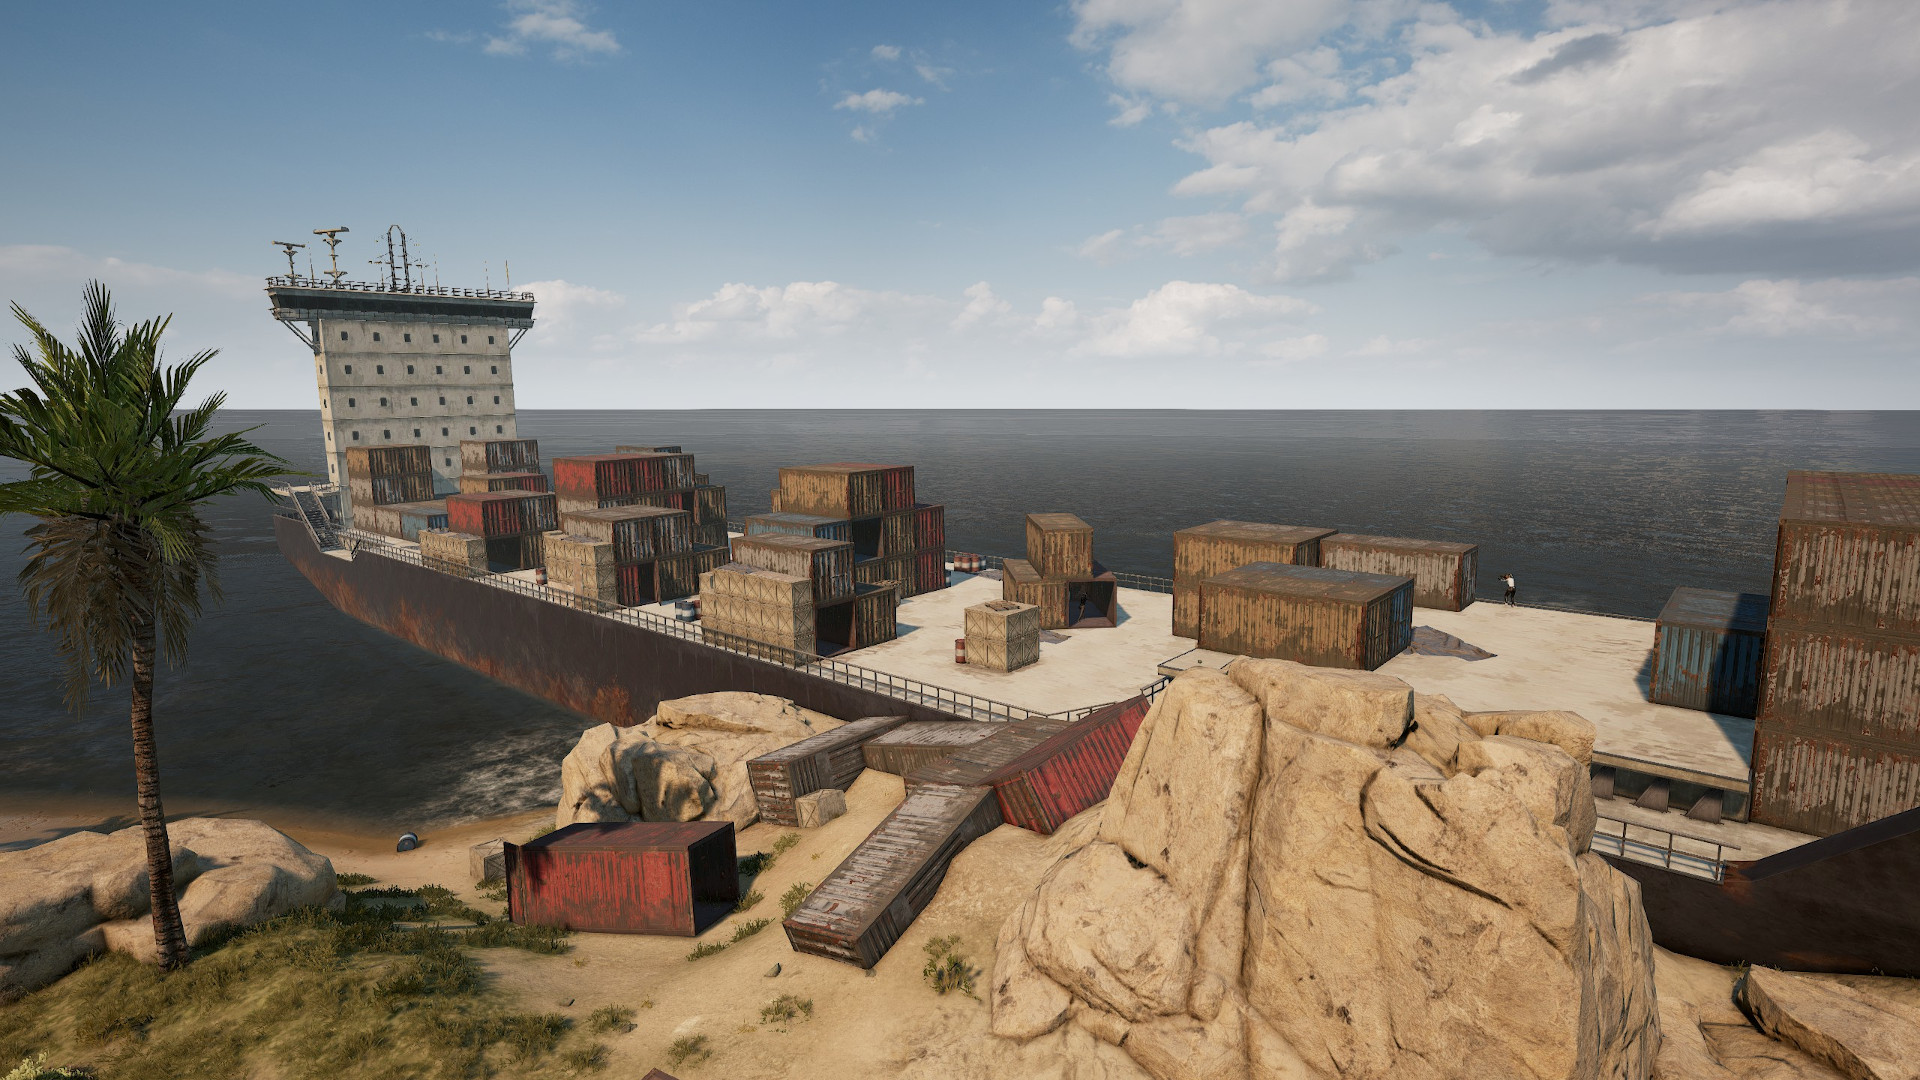 Best PUBG Karakin drops: Cargo Ship, a maroon ship with cargo containers falling out onto the beach below.